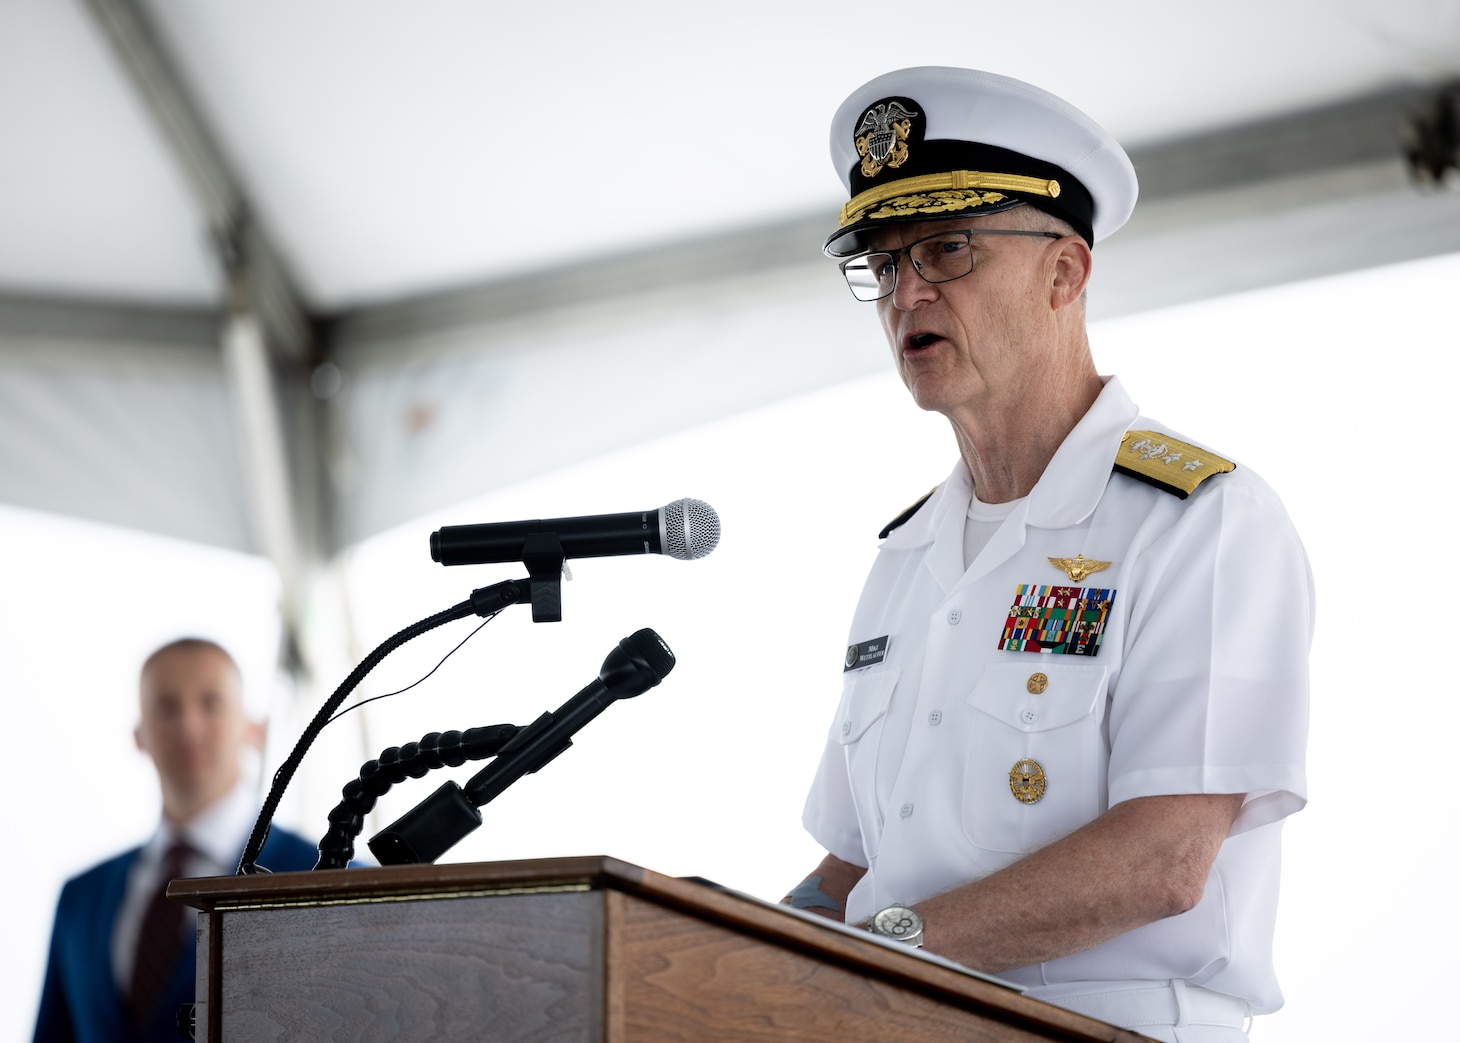 Rear Adm. Michael Wettlaufer, USN Commander, Military Sealift Command (MSC), delivers welcoming remarks during MSC’s National Maritime Day ceremony aboard USNS Comfort (T-AH 20) May 22, 2023. National Maritime Day honors the thousands of dedicated merchant mariners who served aboard United States vessels around the world.